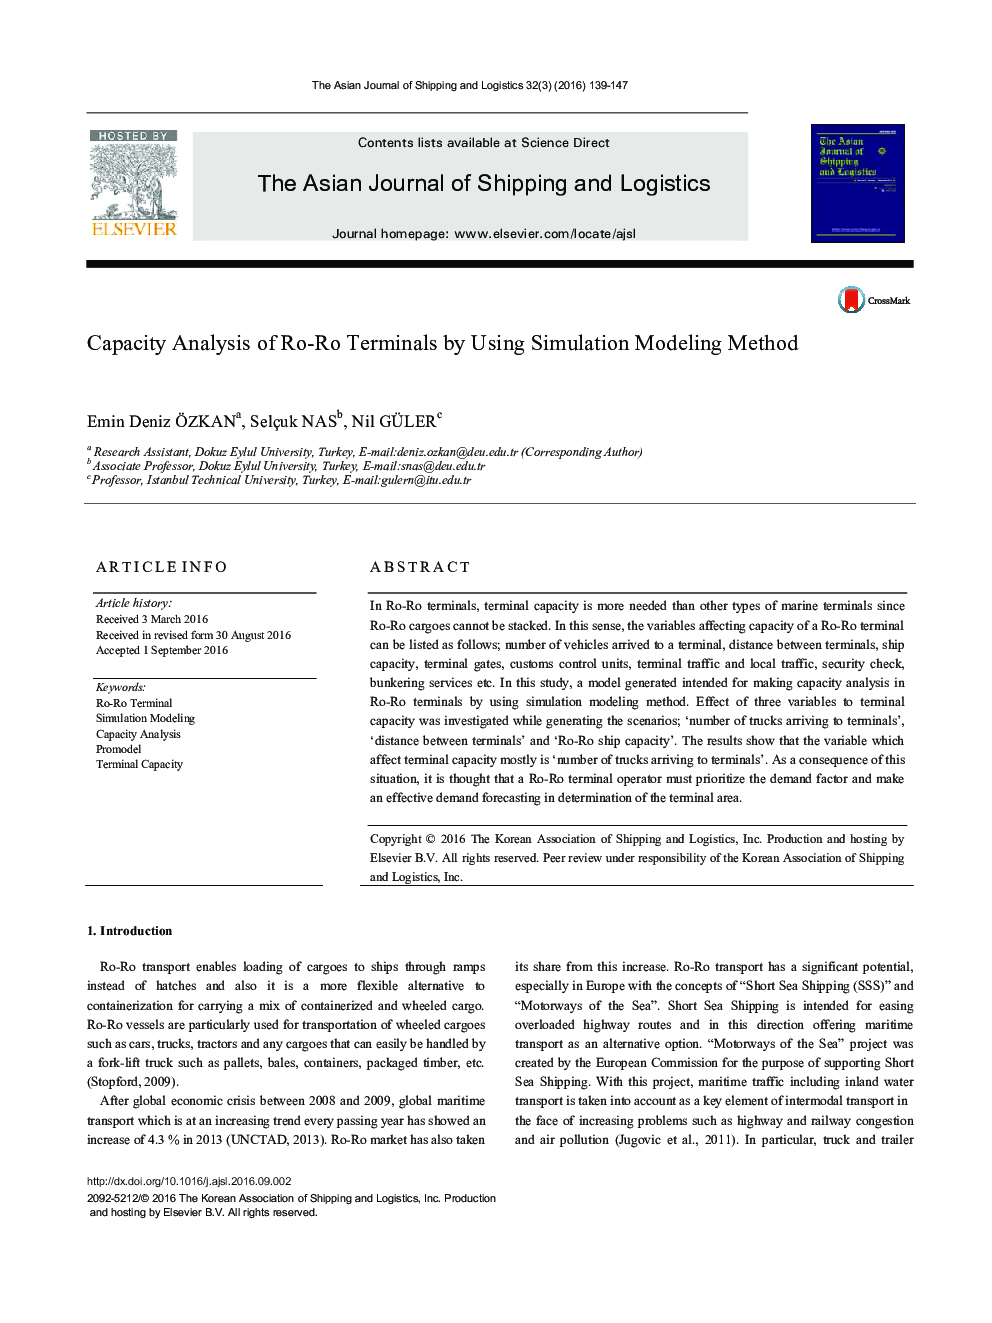 Capacity Analysis of Ro-Ro Terminals by Using Simulation Modeling Method